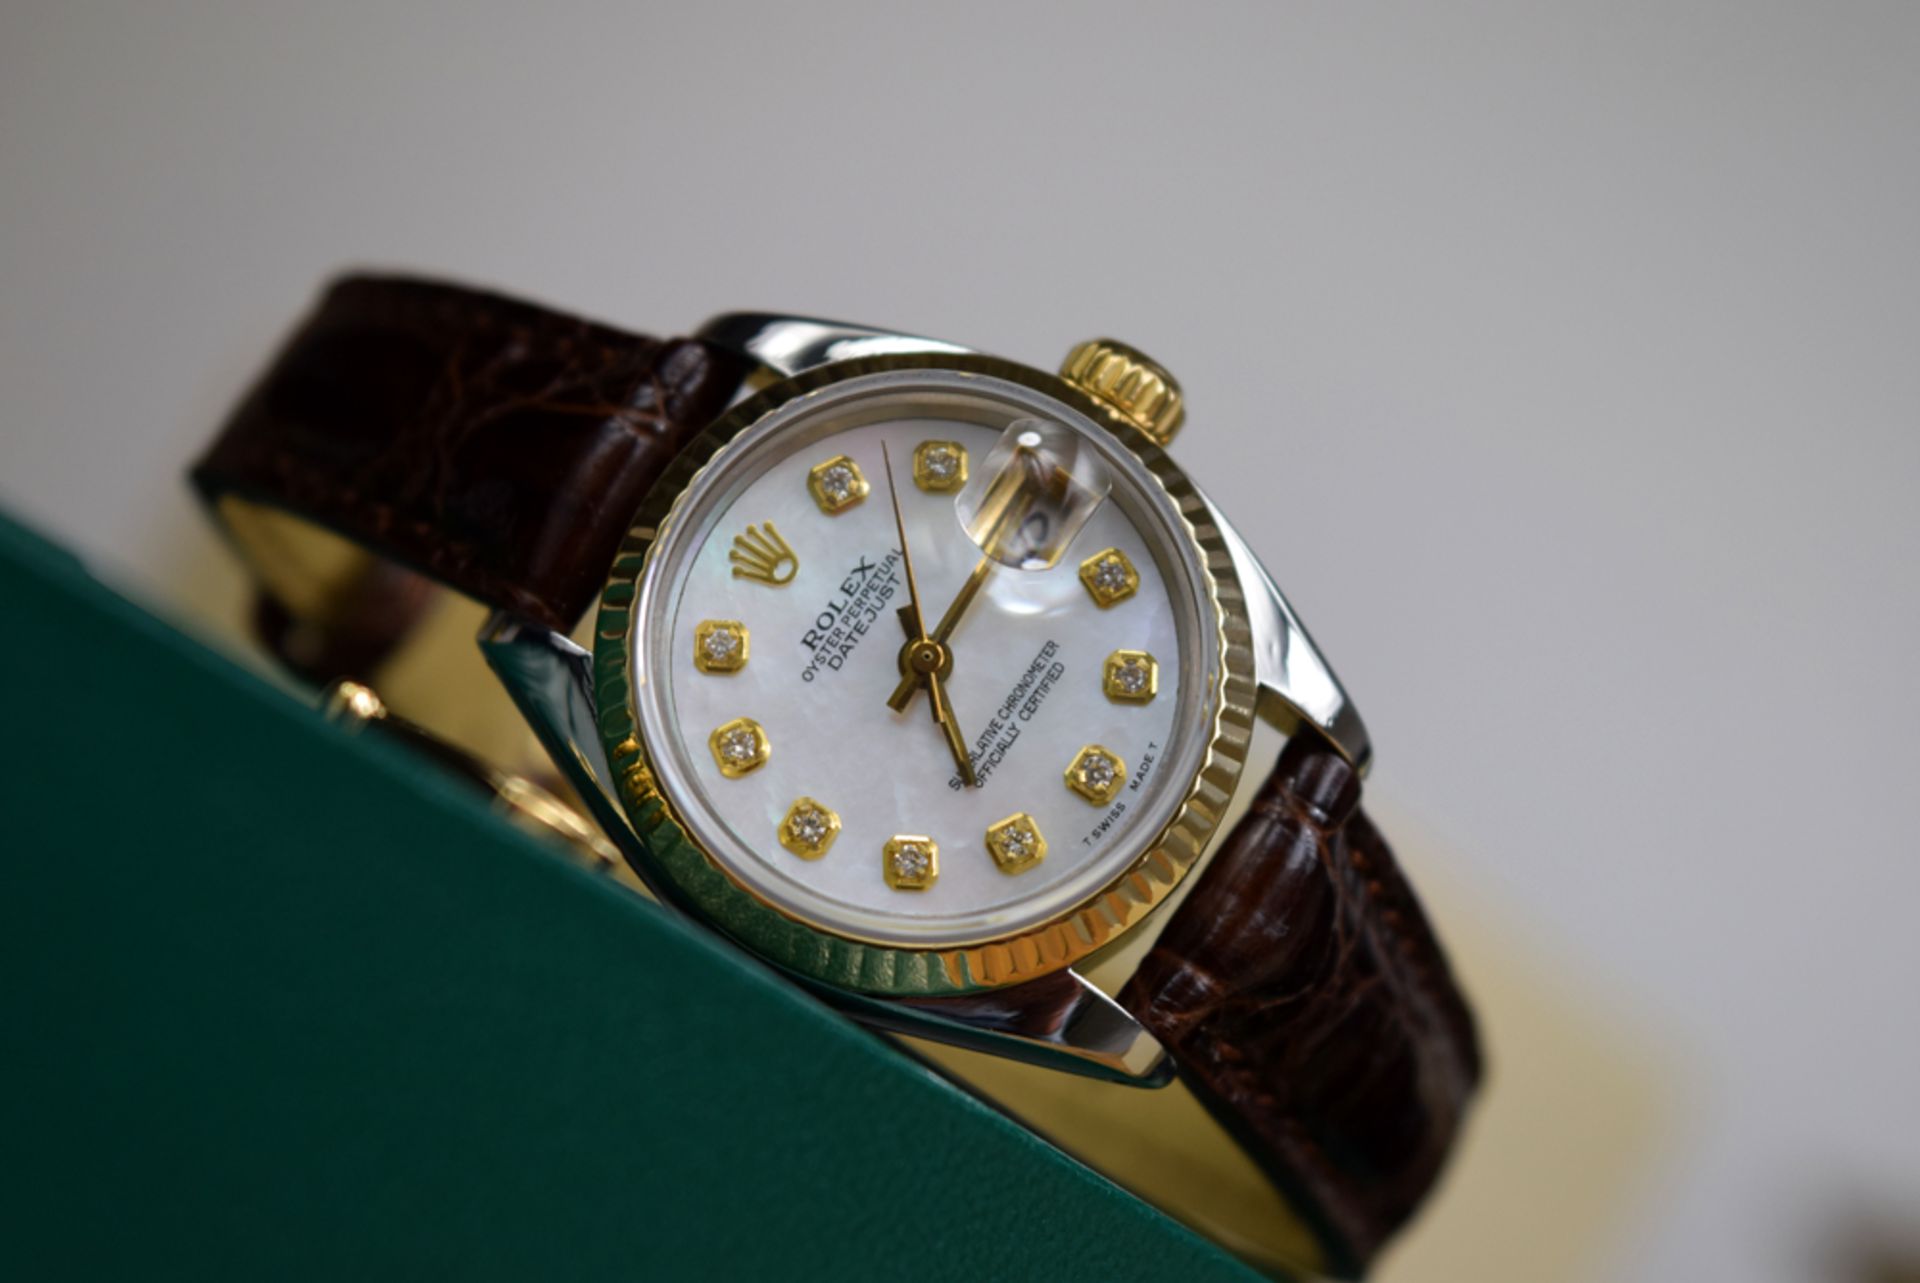 ROLEX - 18K GOLD & STEEL LADY DATEJUST - MOP *DIAMOND* DIAL! - Image 5 of 9